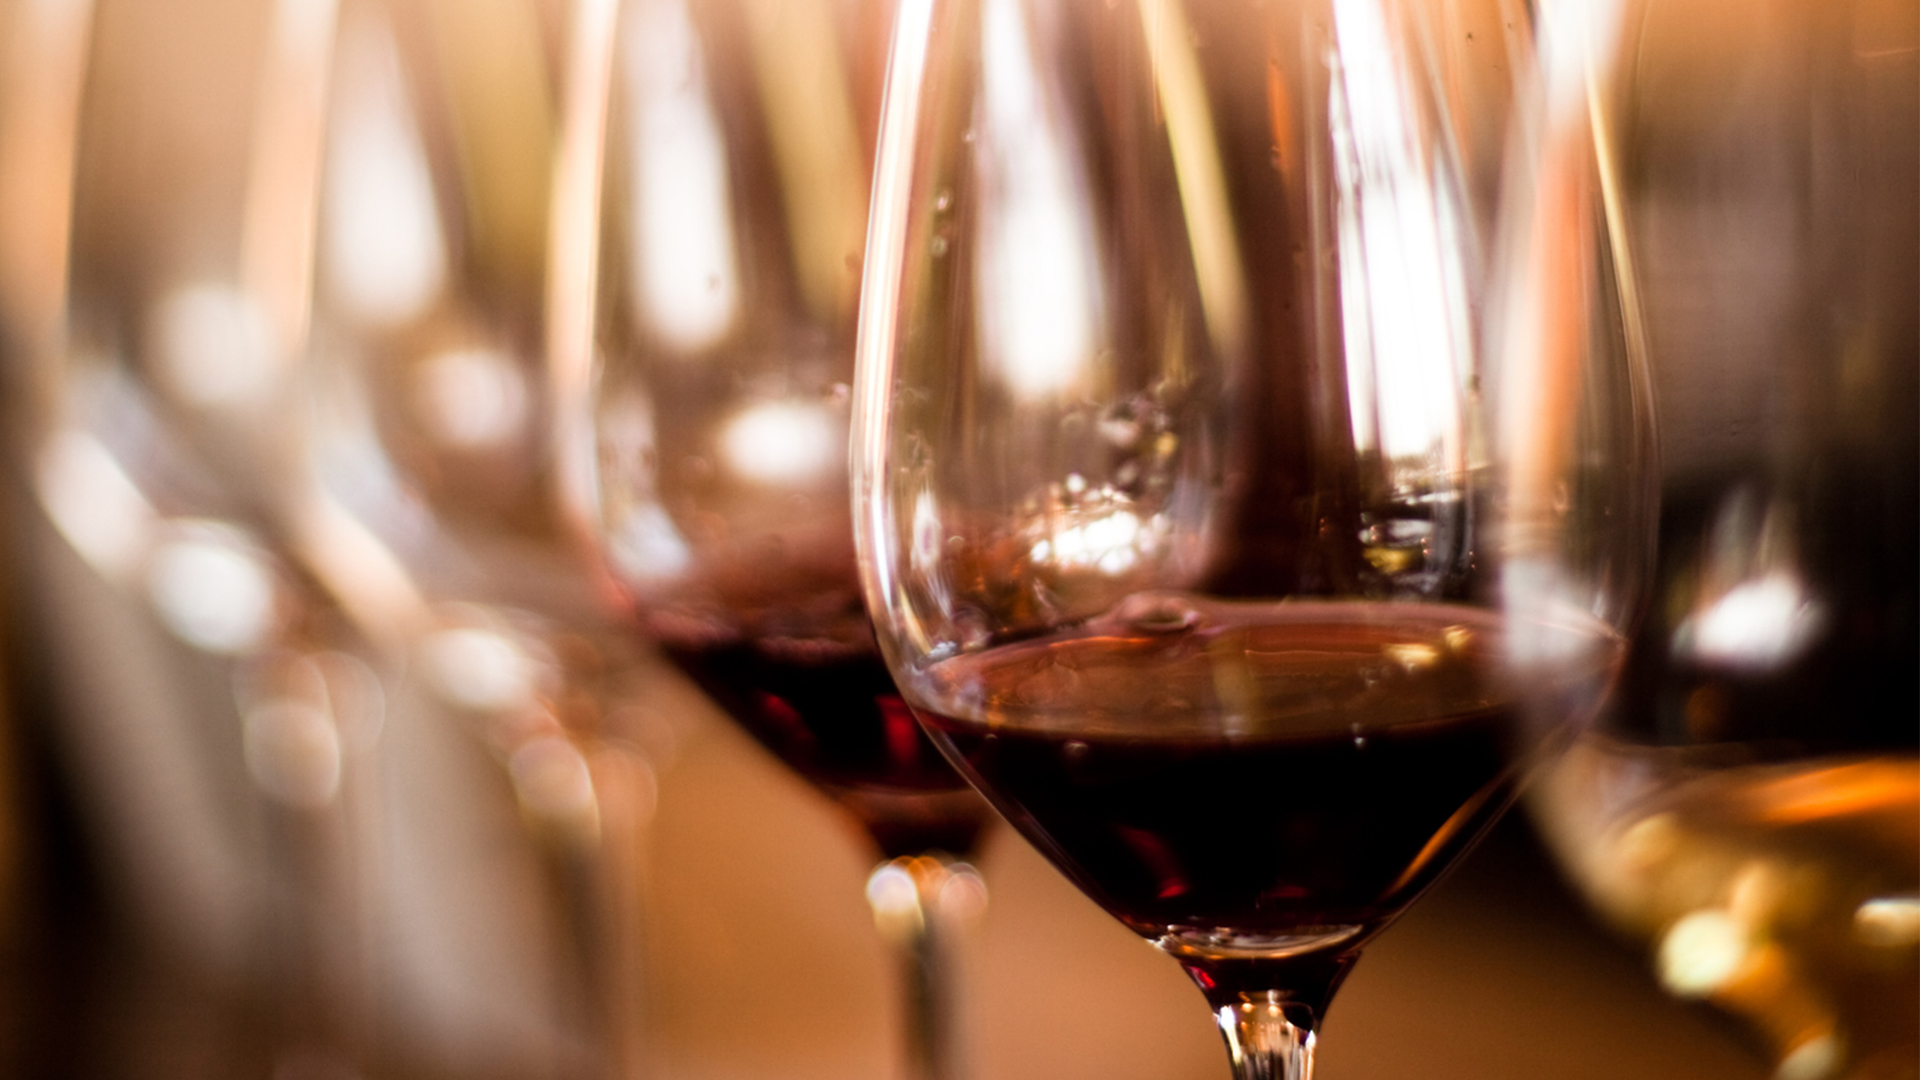 Sample the best from world-class wineries